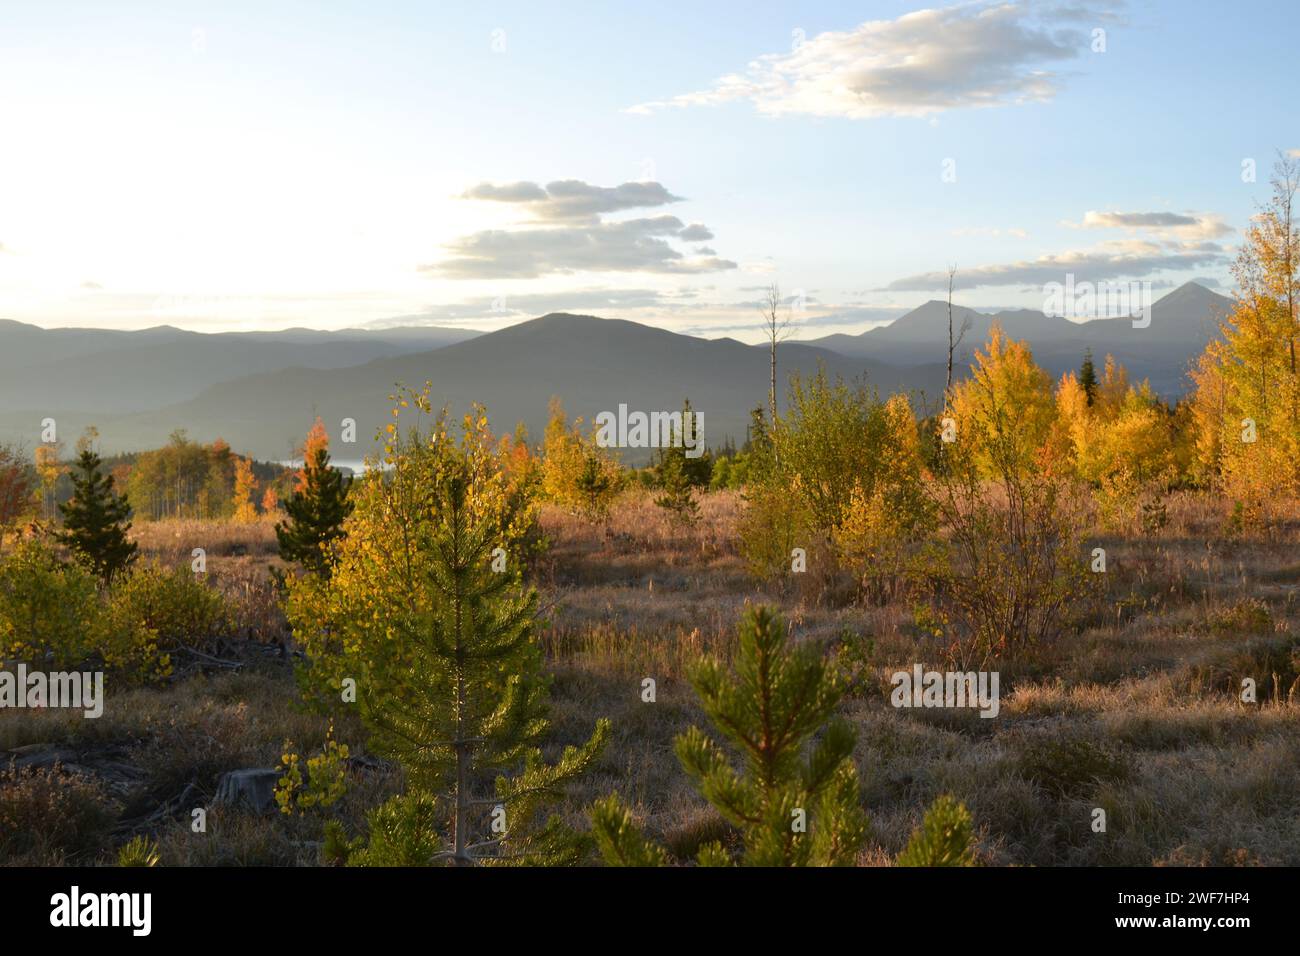 Foggy Mountain Range in Distance Beyond Yellow Fall Trees at Sunrise Stock Photo